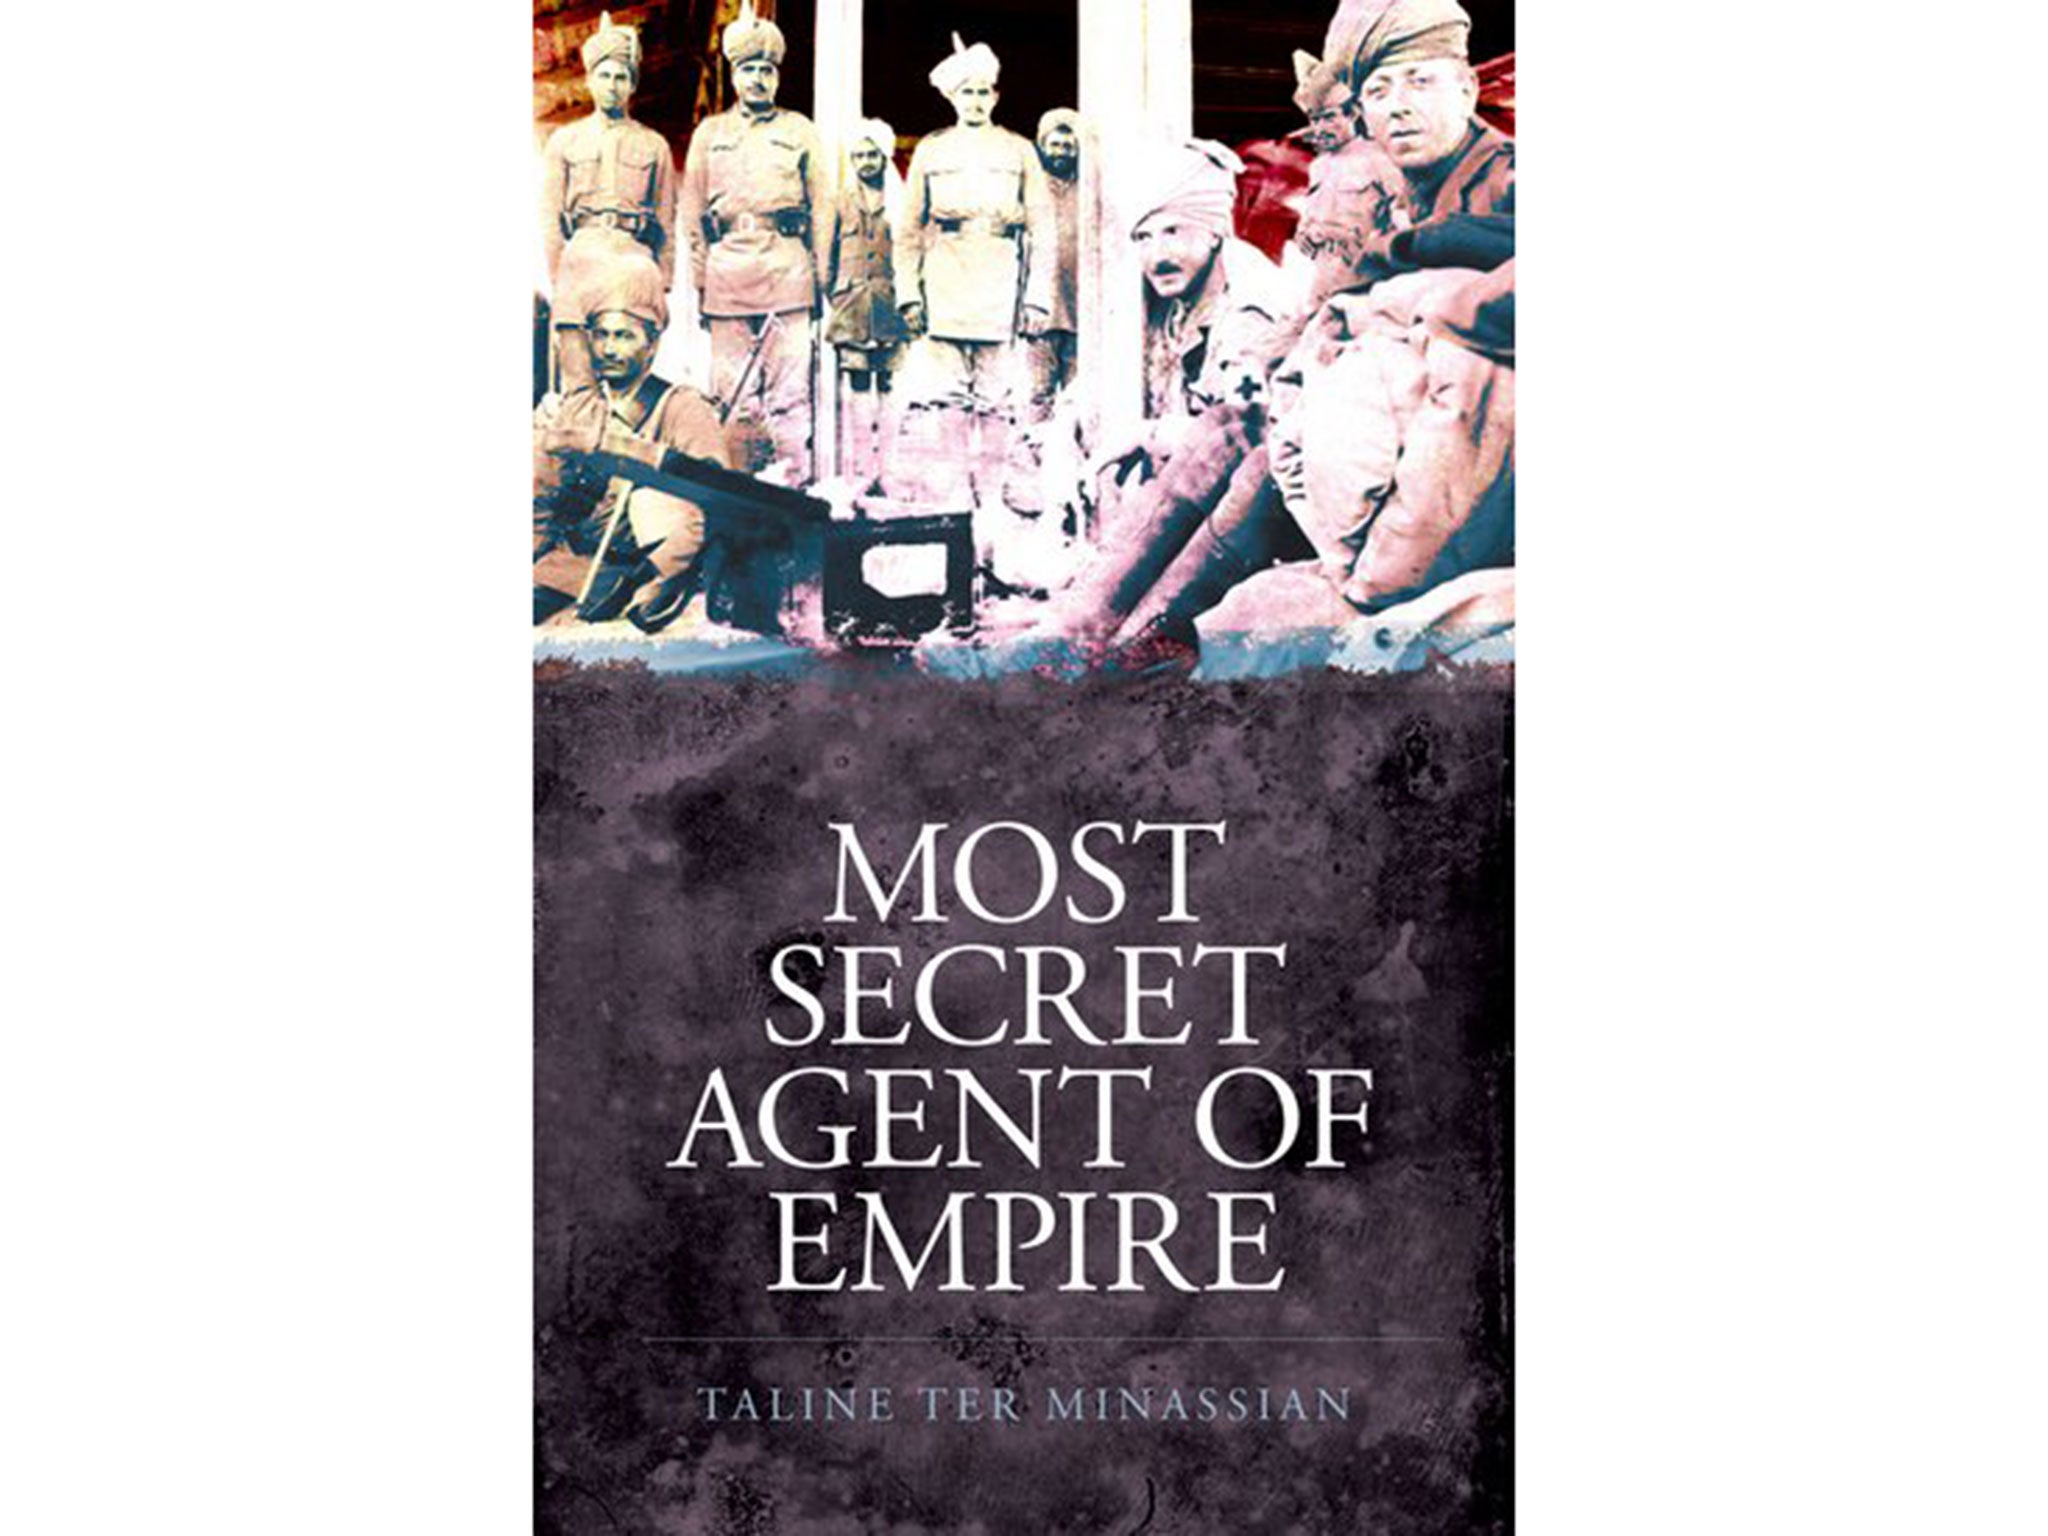 Most Secret Agent of Empire by Taline Ter Minassian